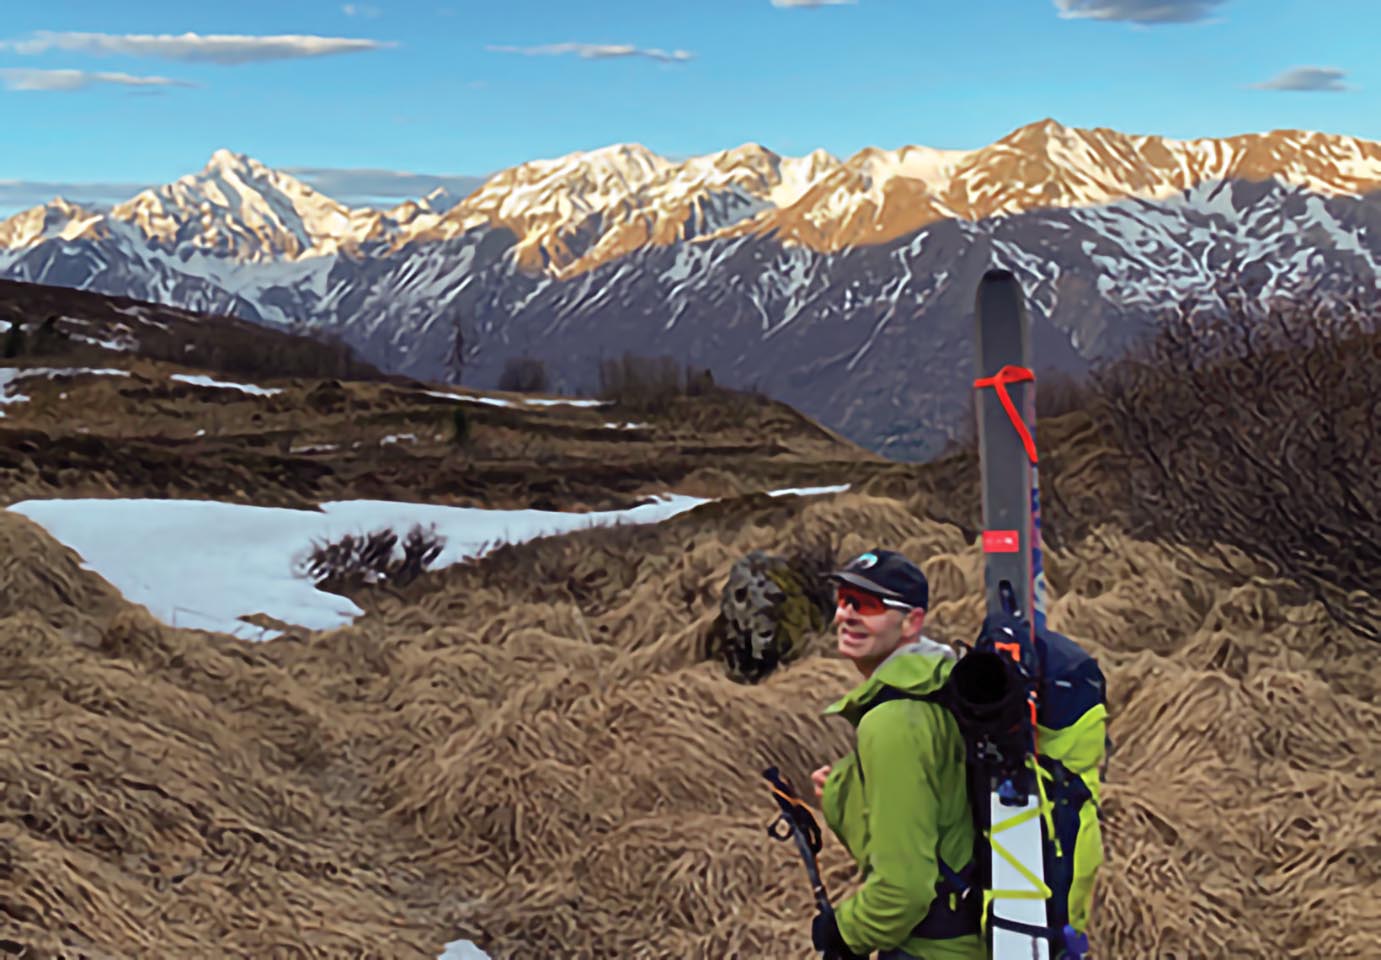 Colgate alumnus Gary Kuehn '85 stands in the open with mountains in the background as he prepares for his next adventure.